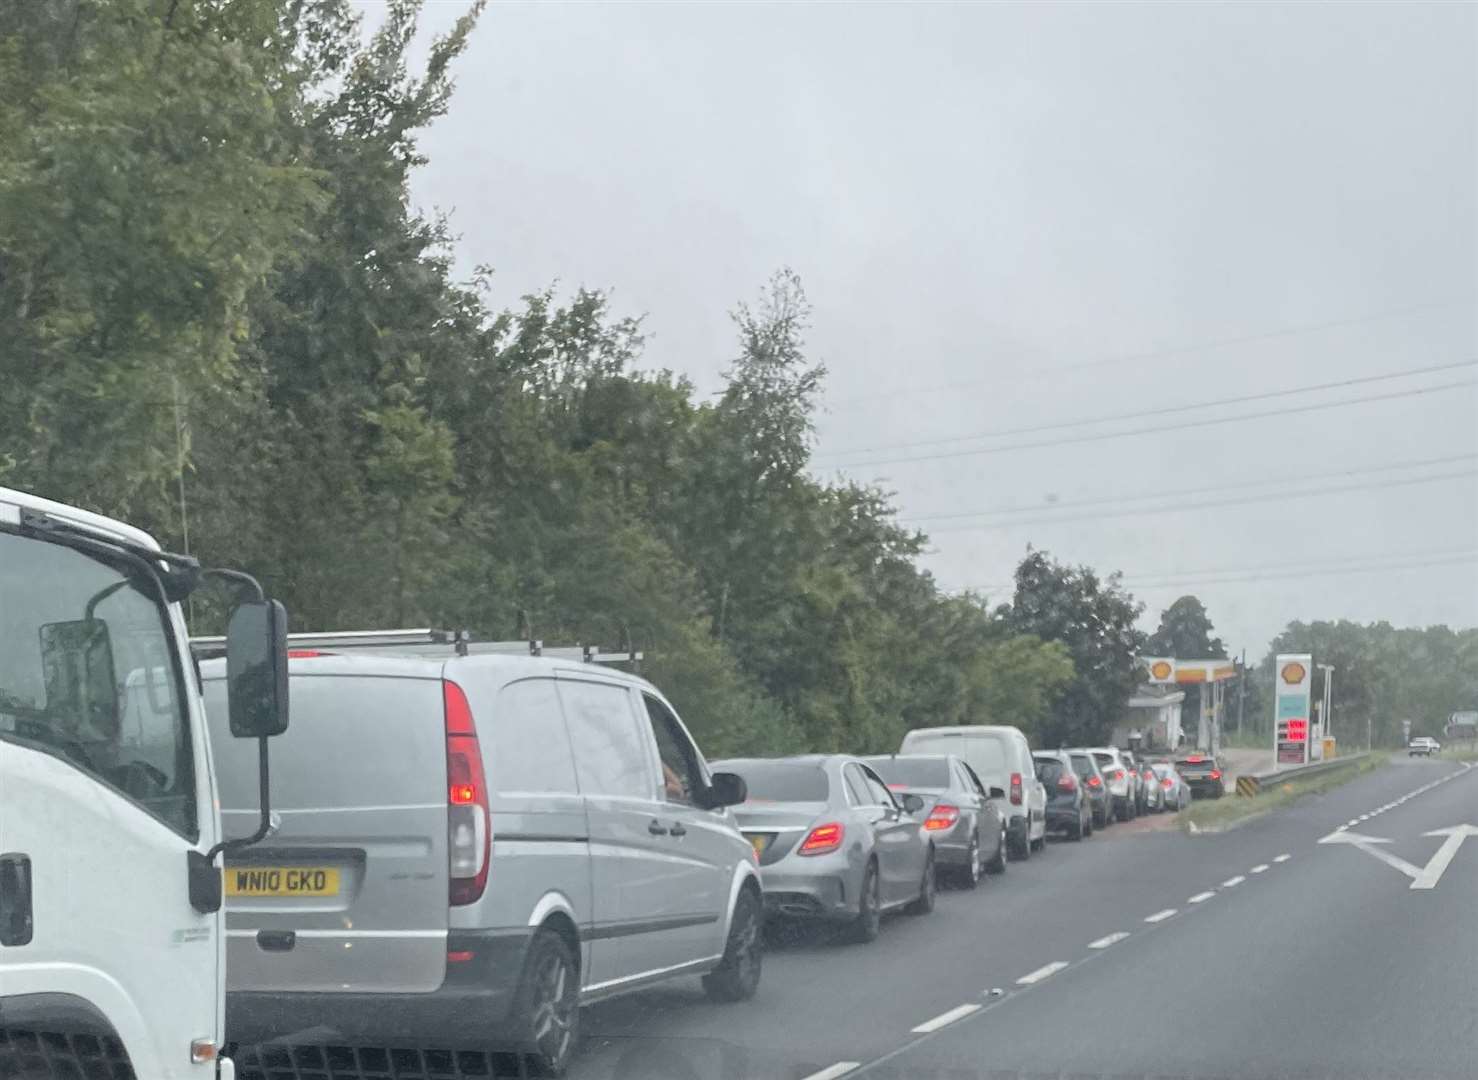 Vehicles were tailing back on the slip road approaching the petrol station on Blue Bell Hill